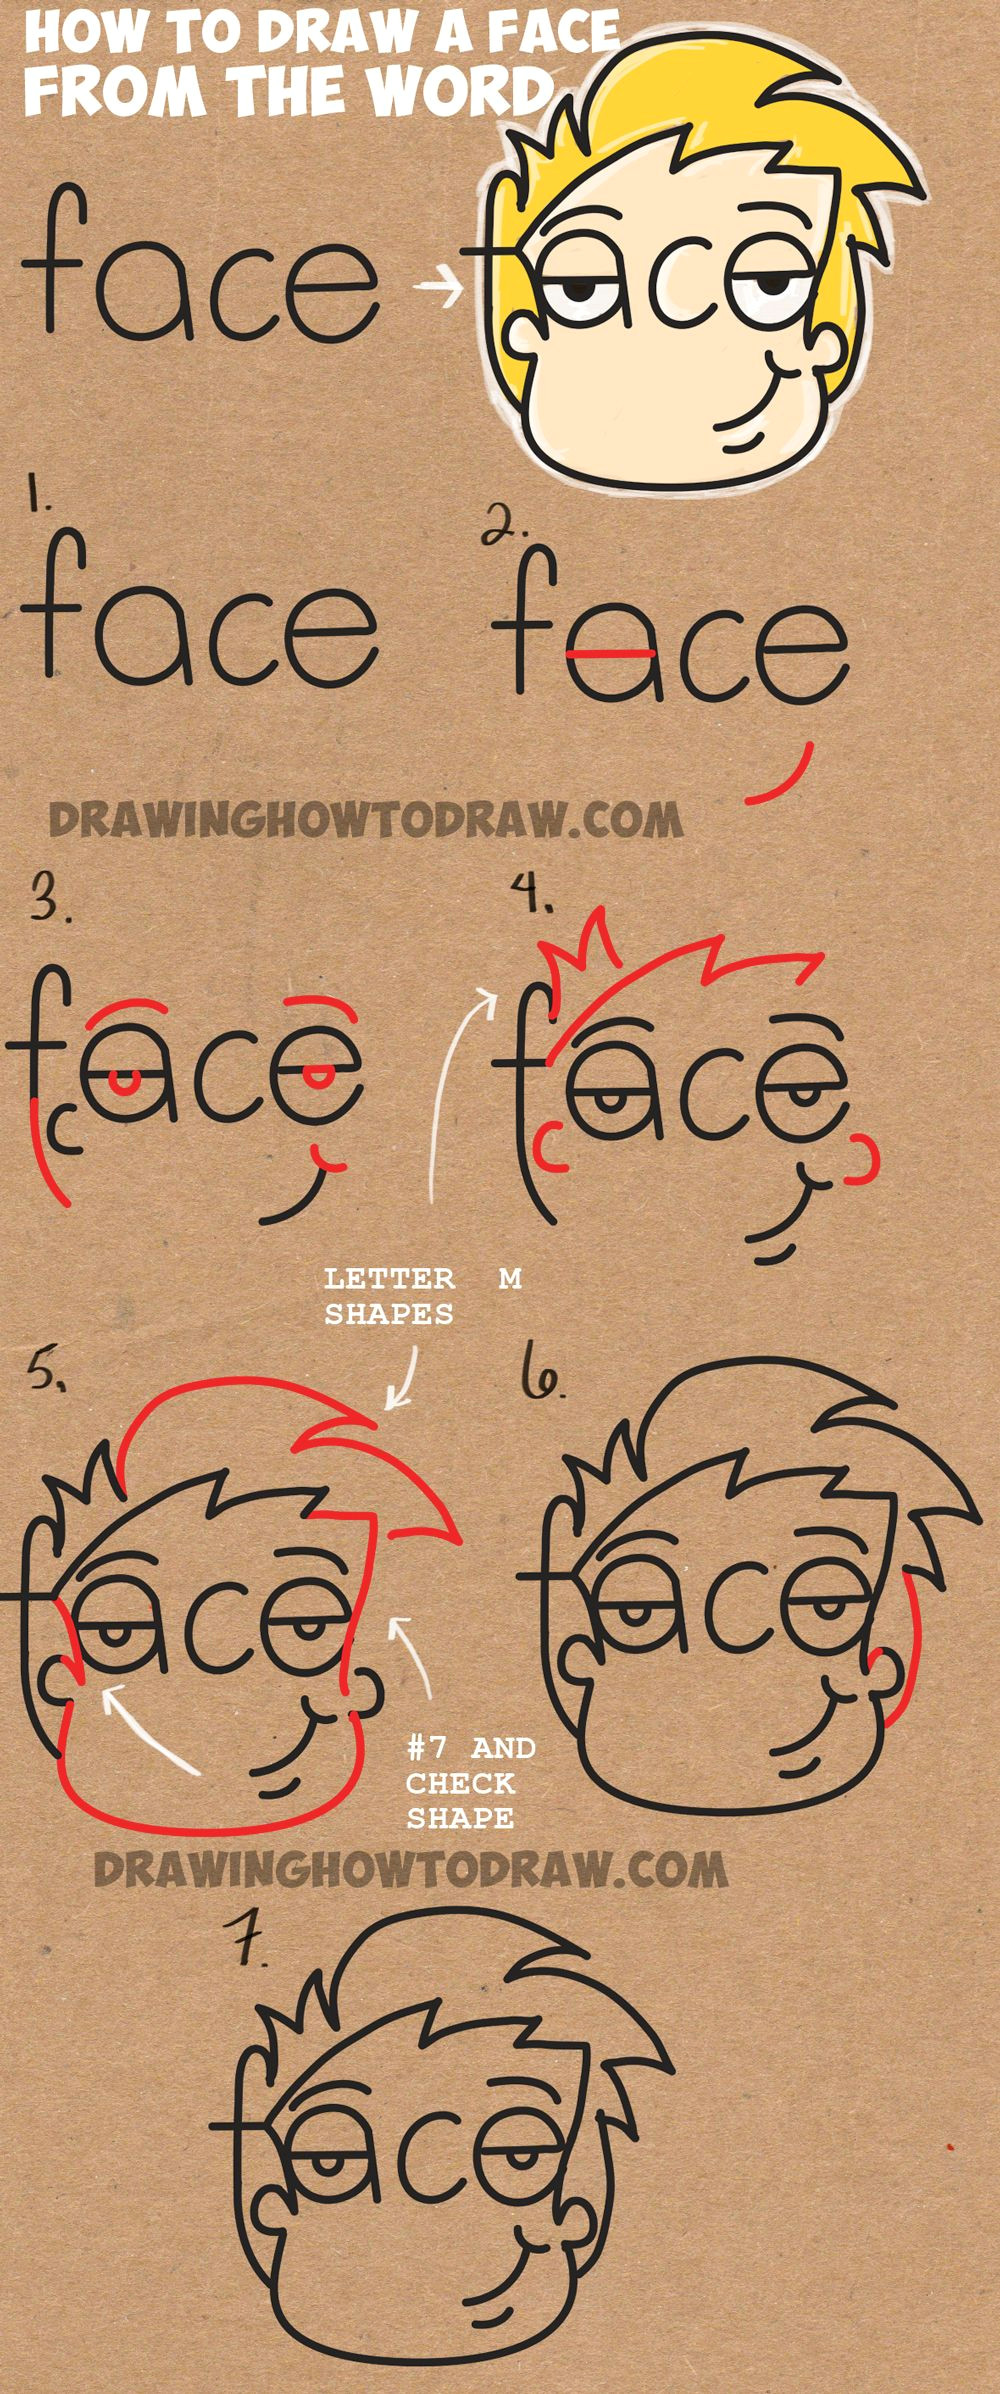 Drawing Cartoons Using Numbers How to Draw Cartoon Faces From the Word Face Easy Step by Step